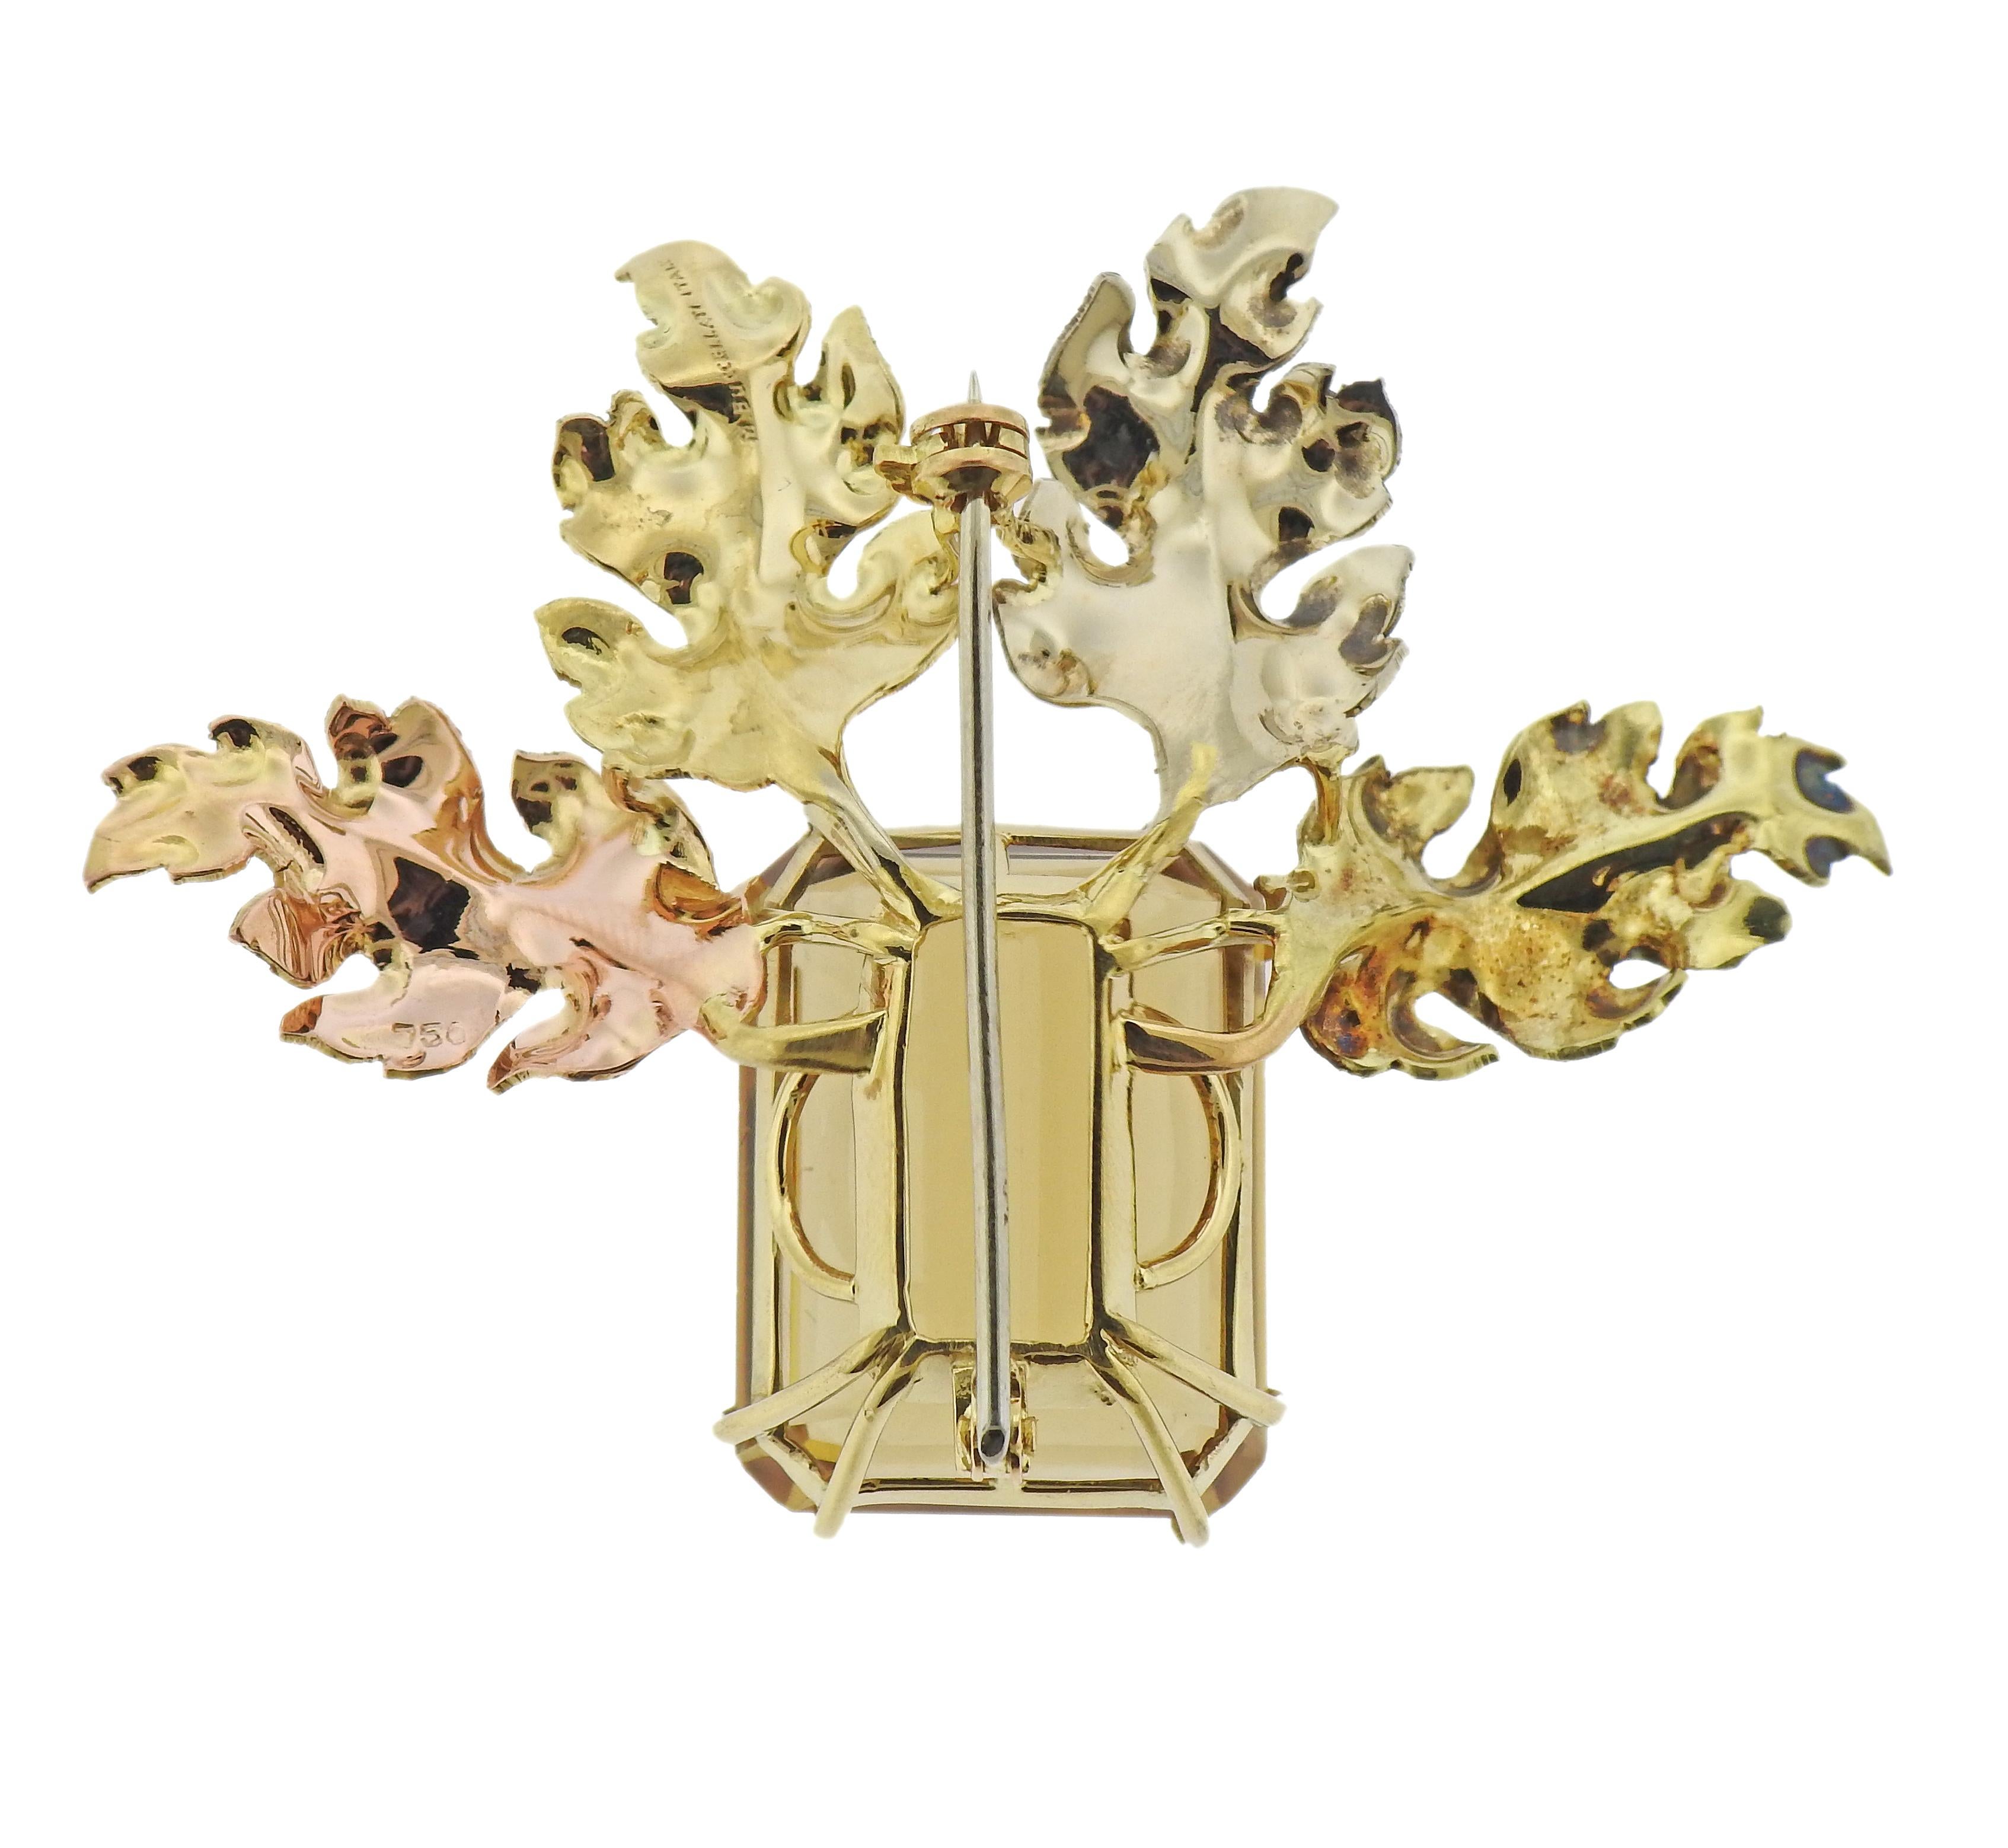 18k tri color gold leaf motif brooch, crafted by Mario Buccellati, adorned with approx. 32.5-33 carat citrine (stone measures 22.85 x 17.6 x 12.2mm). Brooch measures 1 7/8